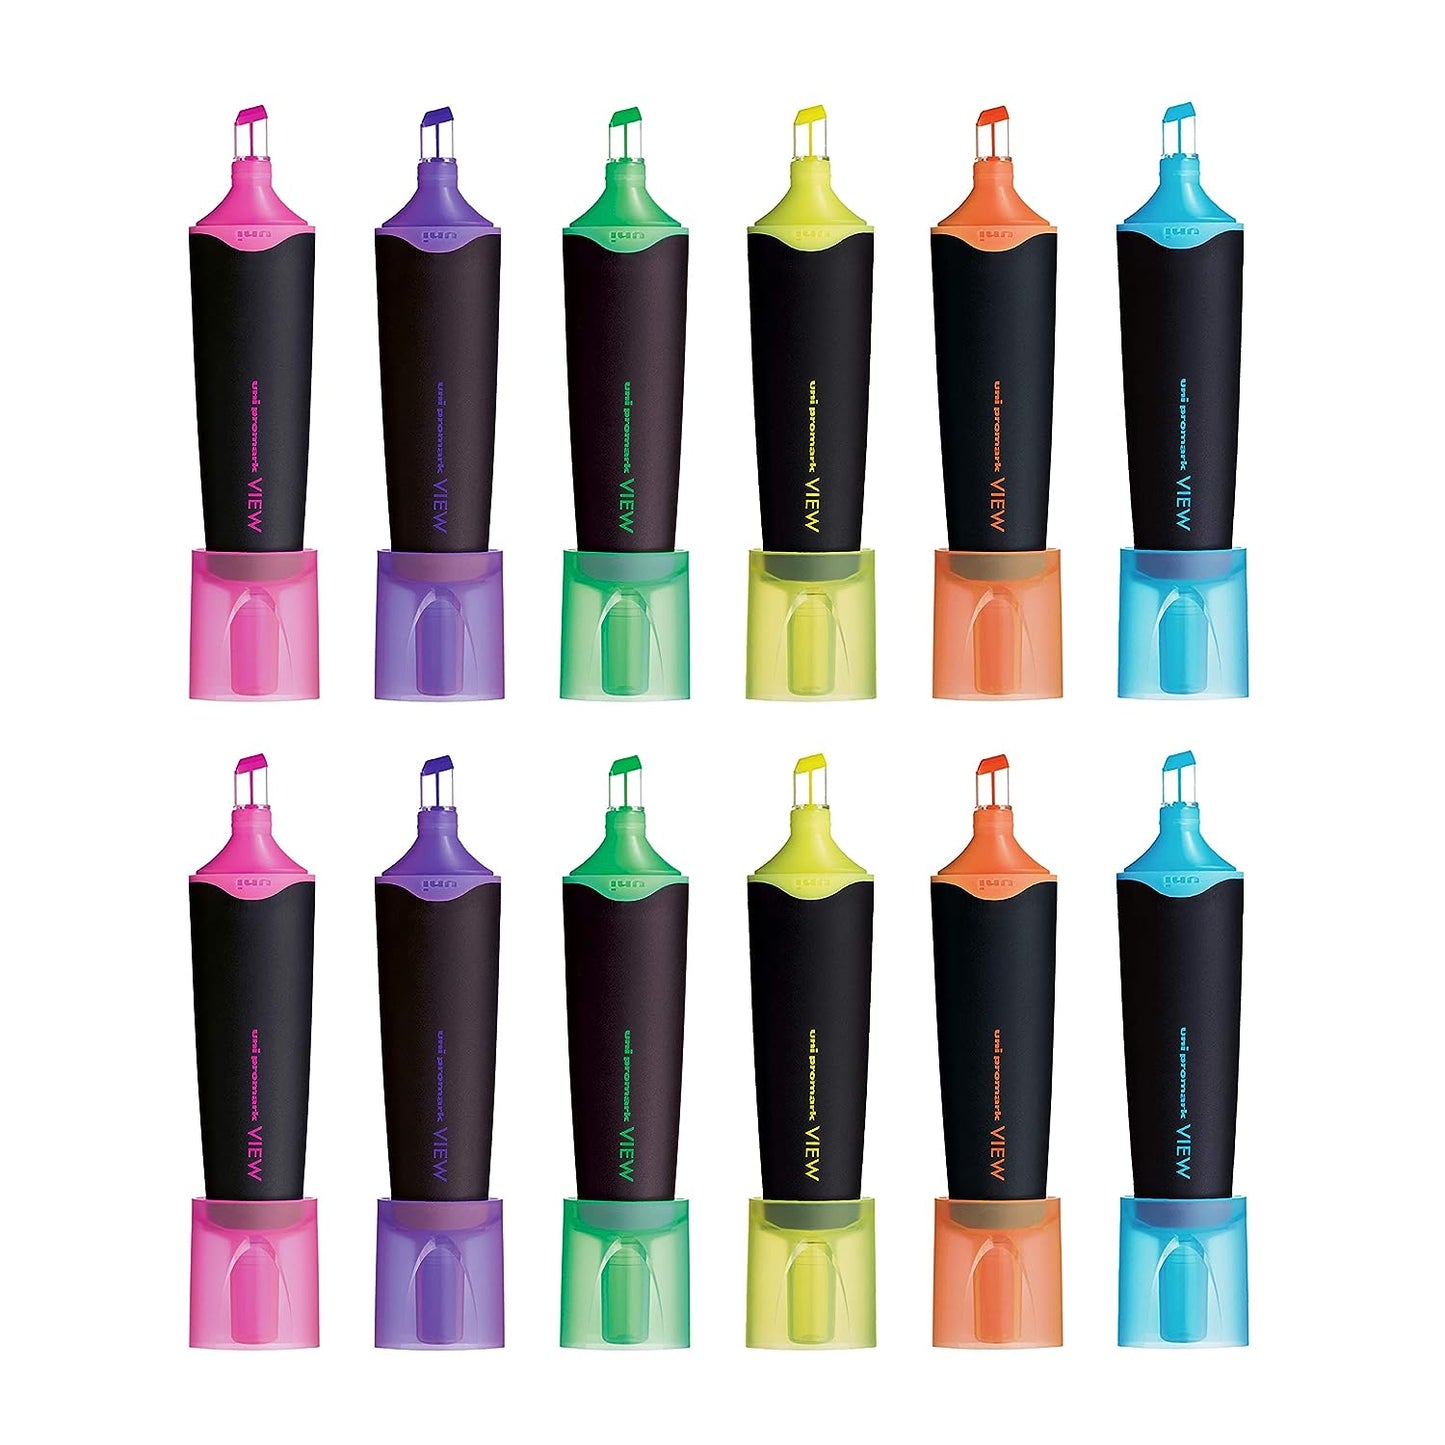 Uniball USP200 Promarkview Highlighter (Assorted Color, Pack Of 12) Orange,Blue,Green,Violet,Pink & Yellow, medium, UNHL200CS12